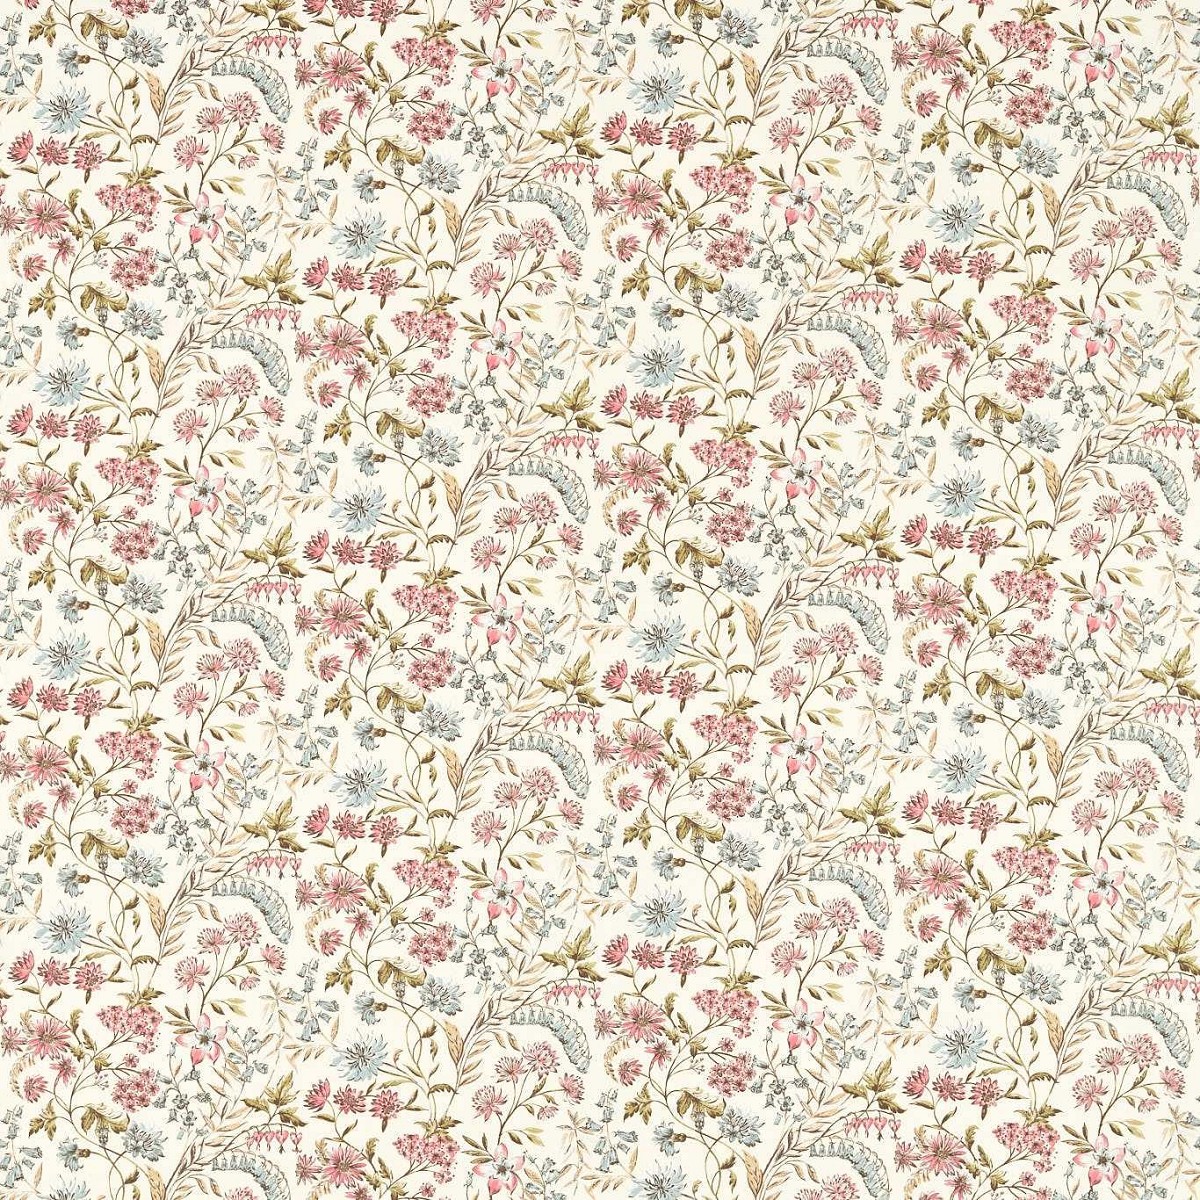 Whinfell Blush Fabric by Studio G